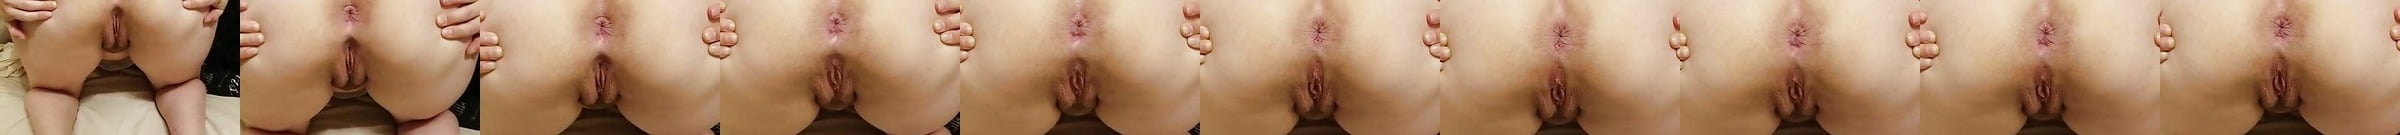 Featured Wink Porn Videos 4 XHamster